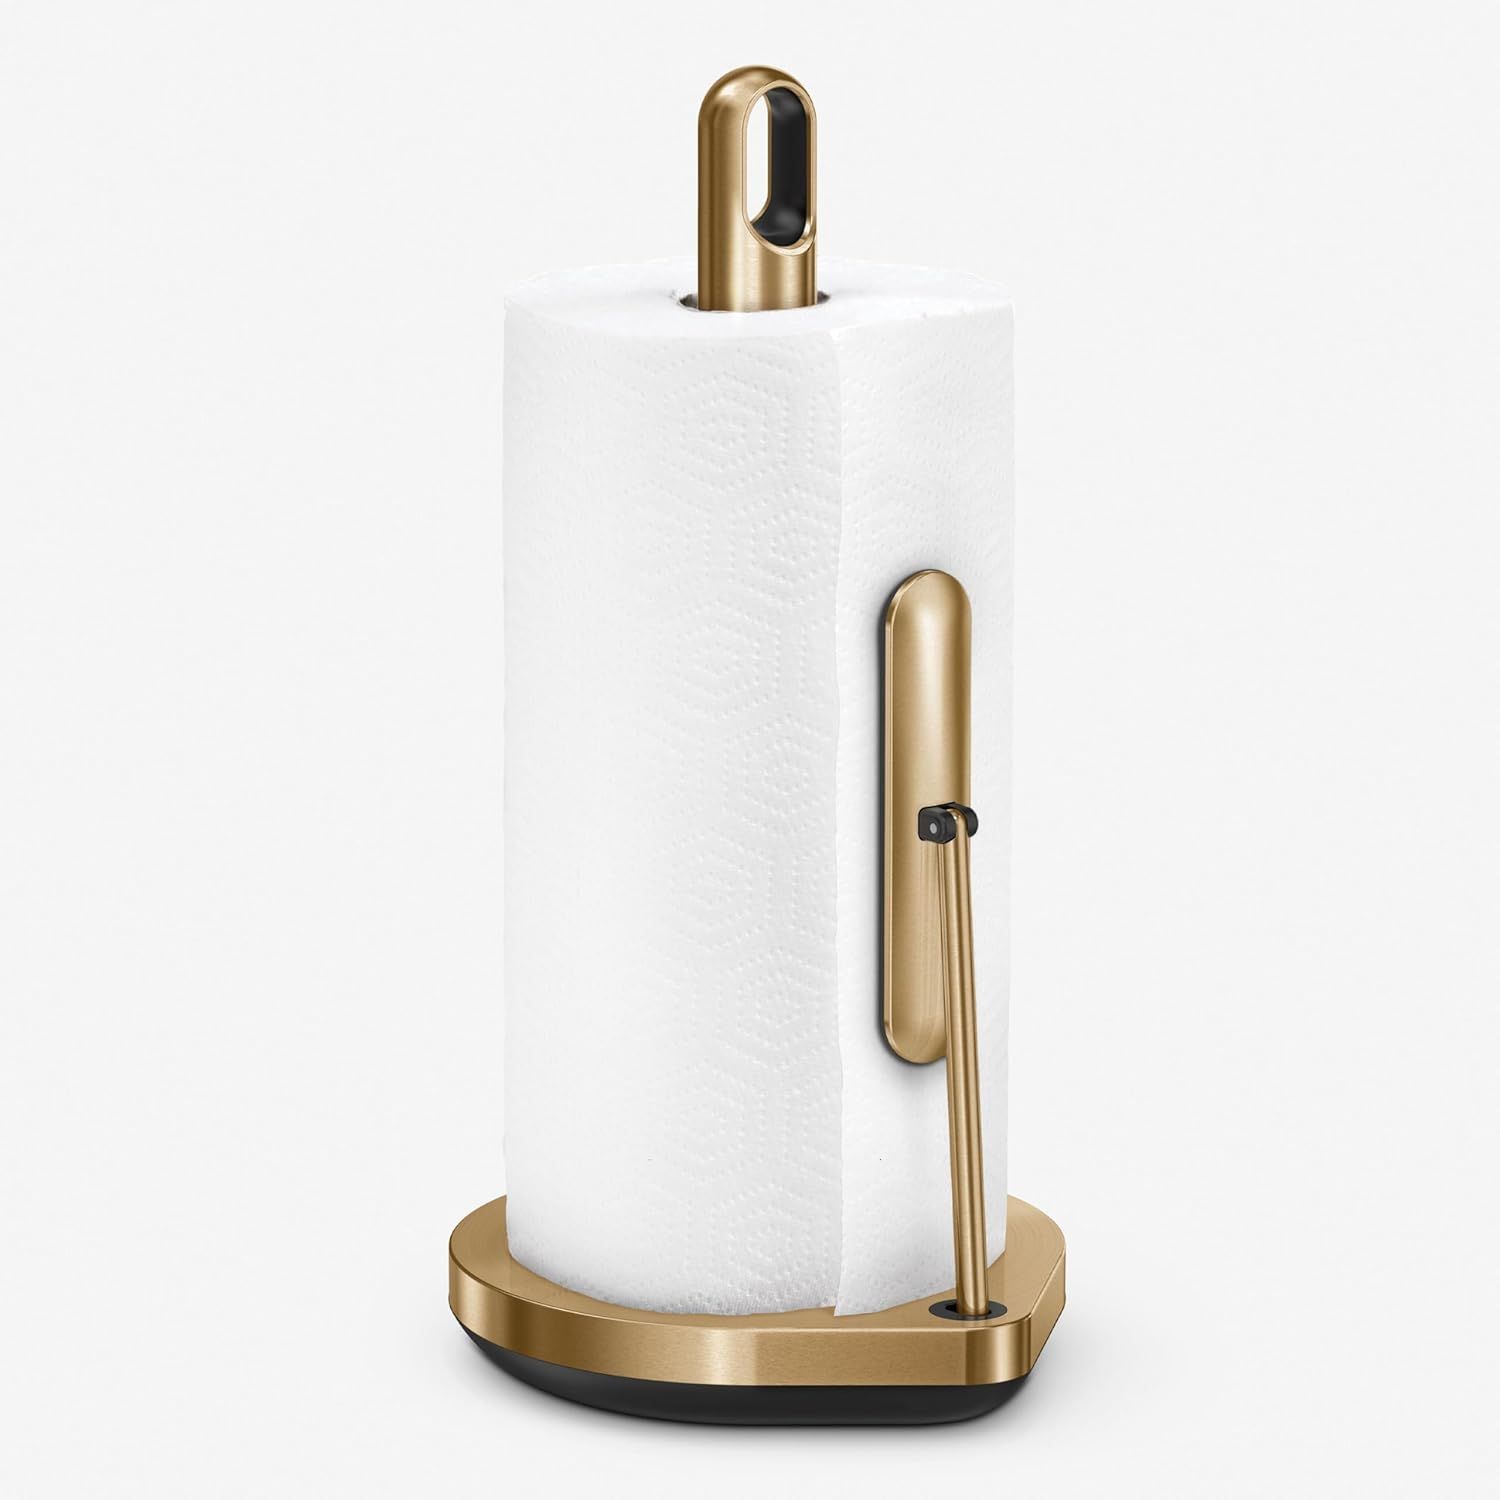 simplehuman Tension Arm Paper Towel Holder, Brass Stainless Steel, Gold | Amazon (US)